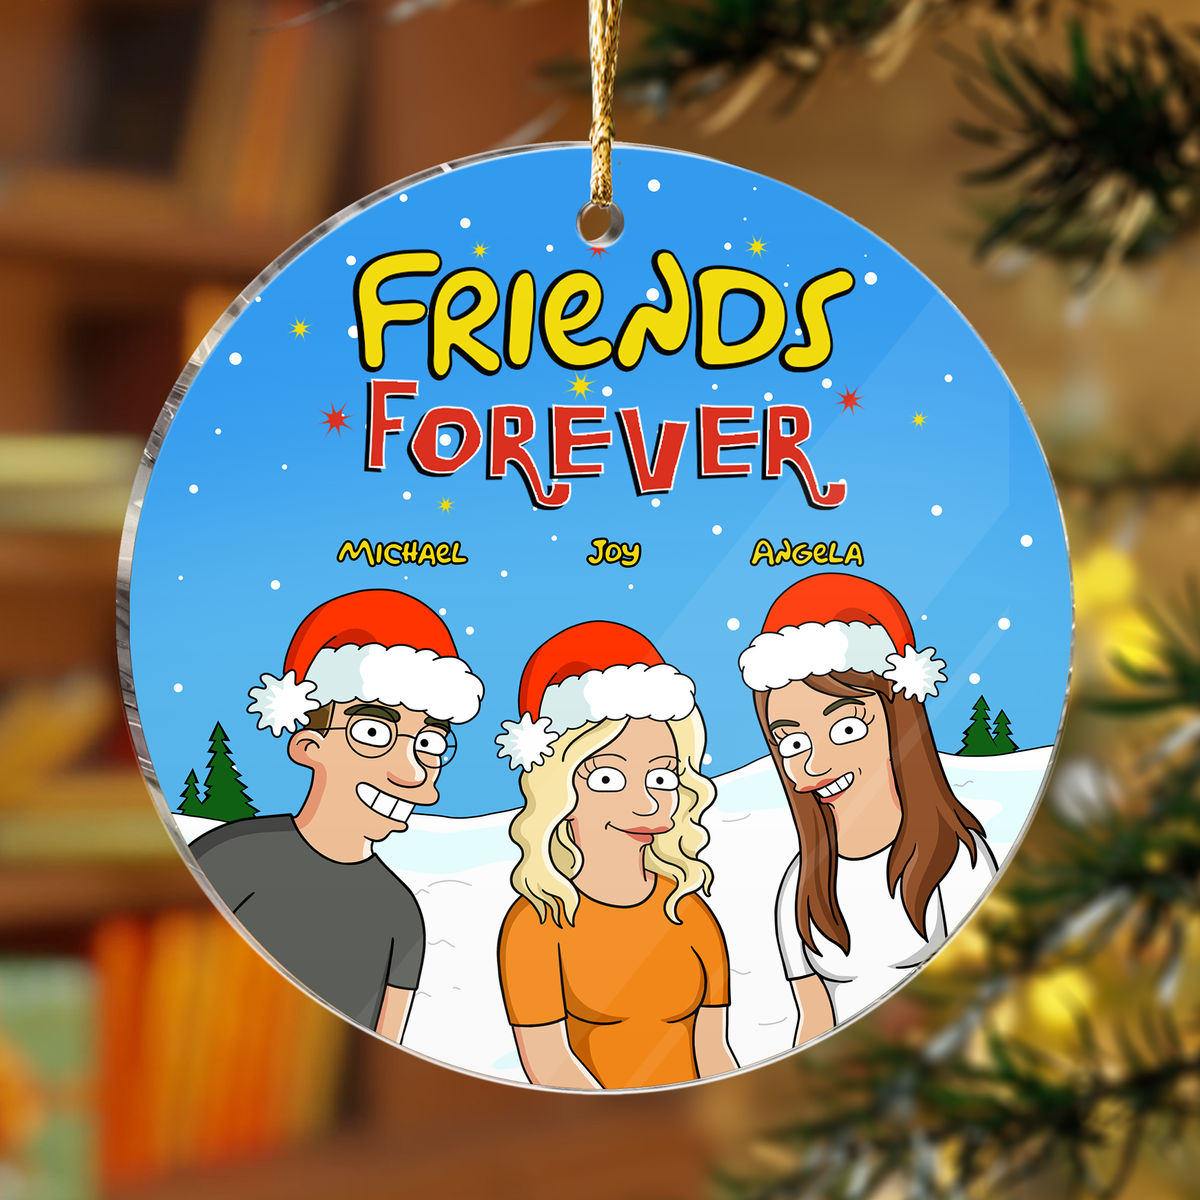 Geeky Gang - Best Coworkers Ever - Funny Christmas Gifts For Your Loved Ones - Acrylic Circle Ornament (b3)_3